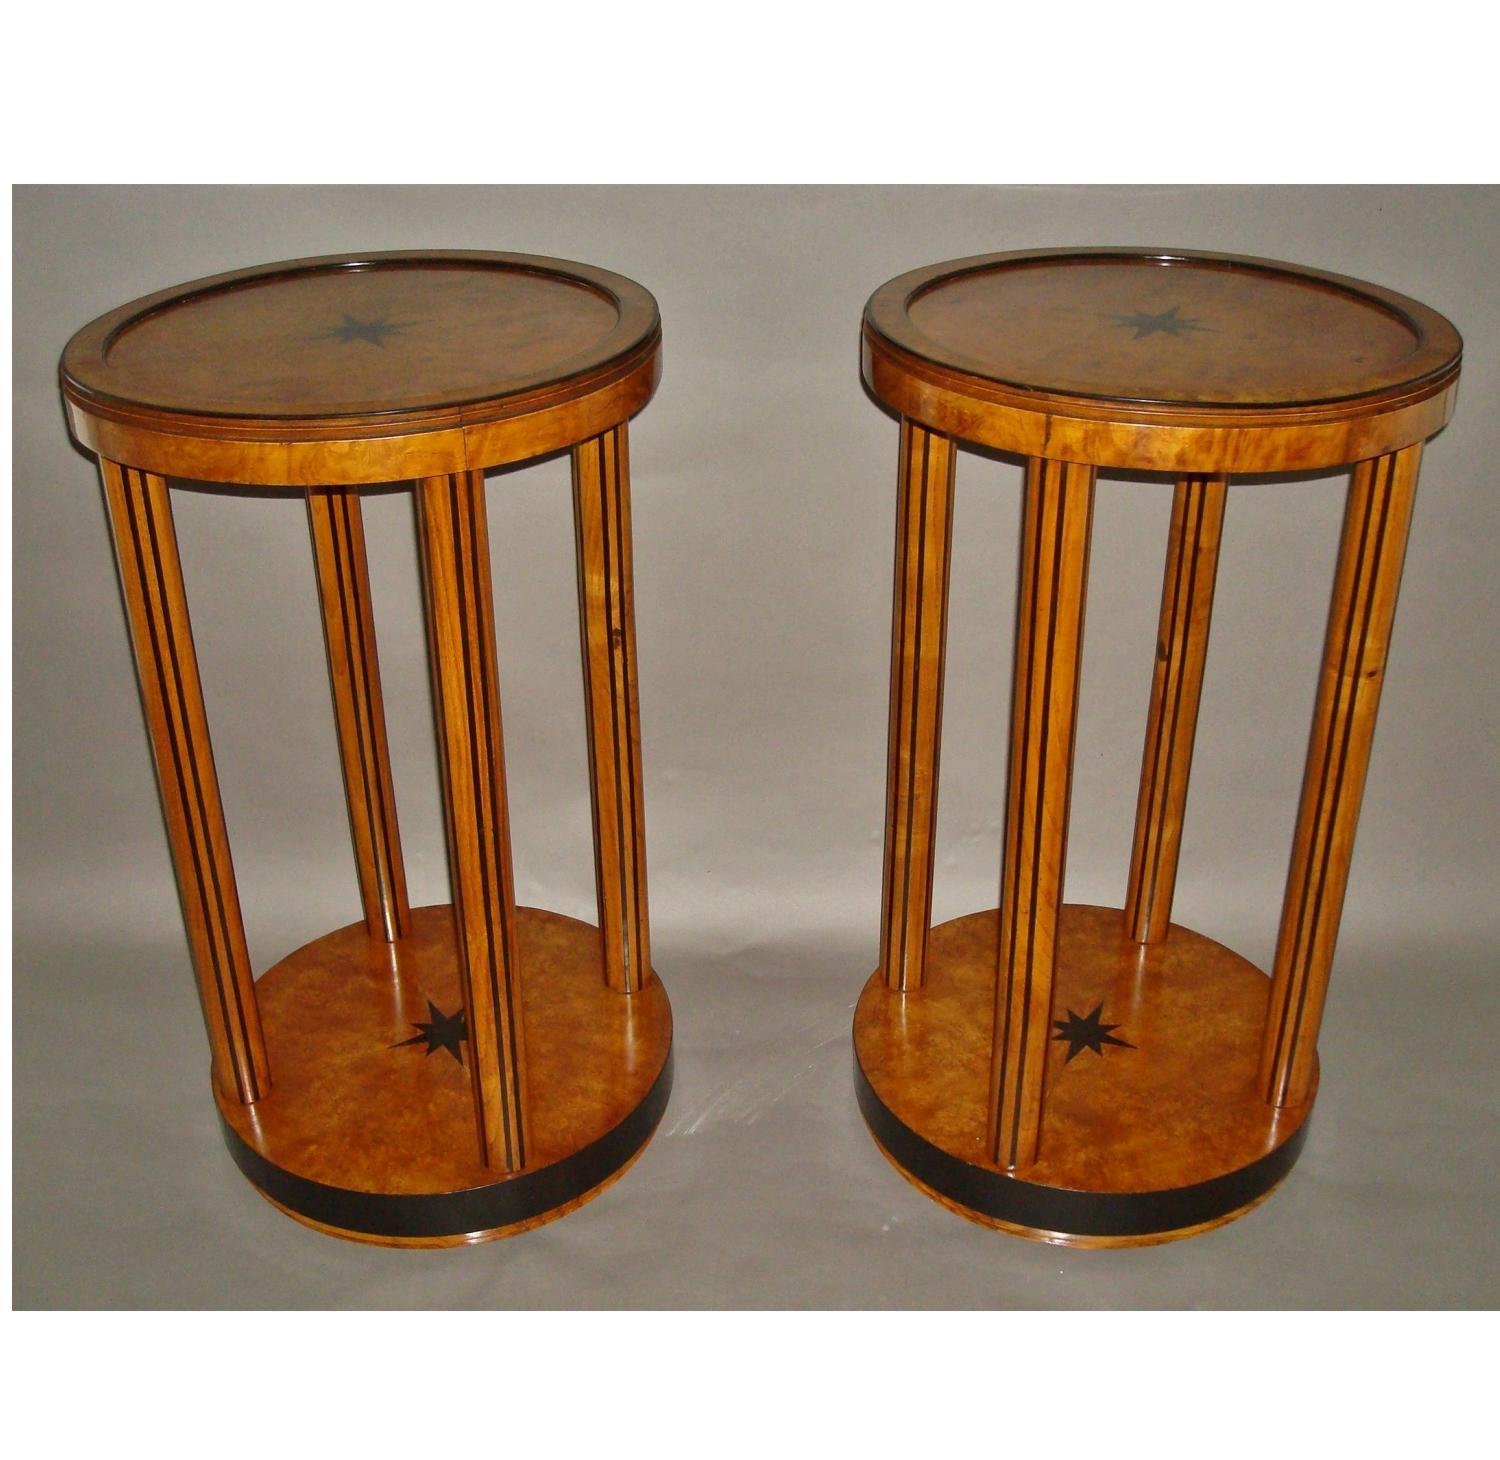 A pair of burr elm and ebony occasional tables